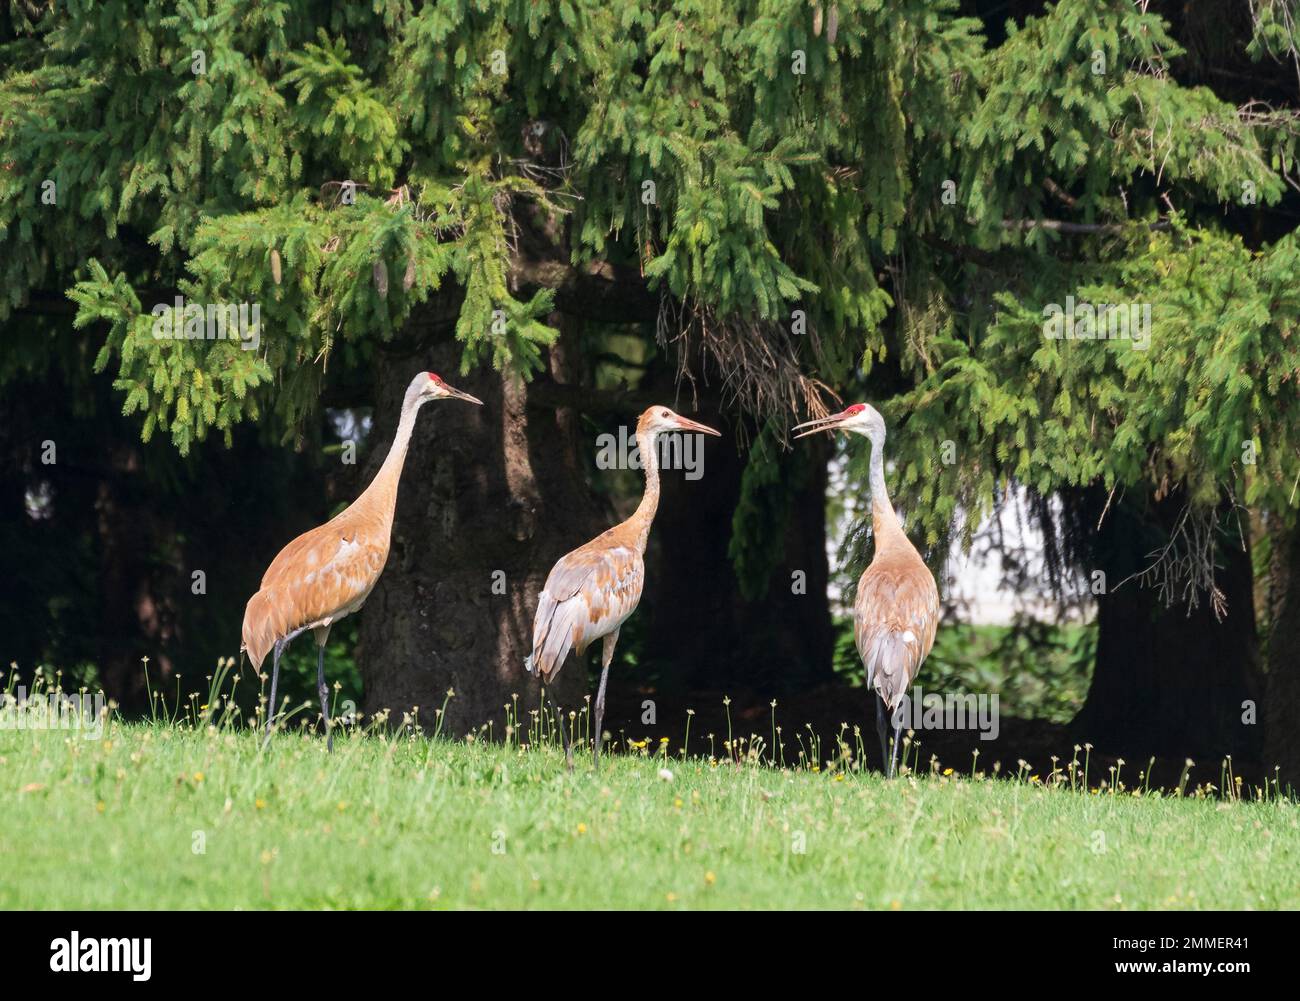 Family of three Sandhill Cranes, Grus canadensis, in field by  wooded area. Stock Photo